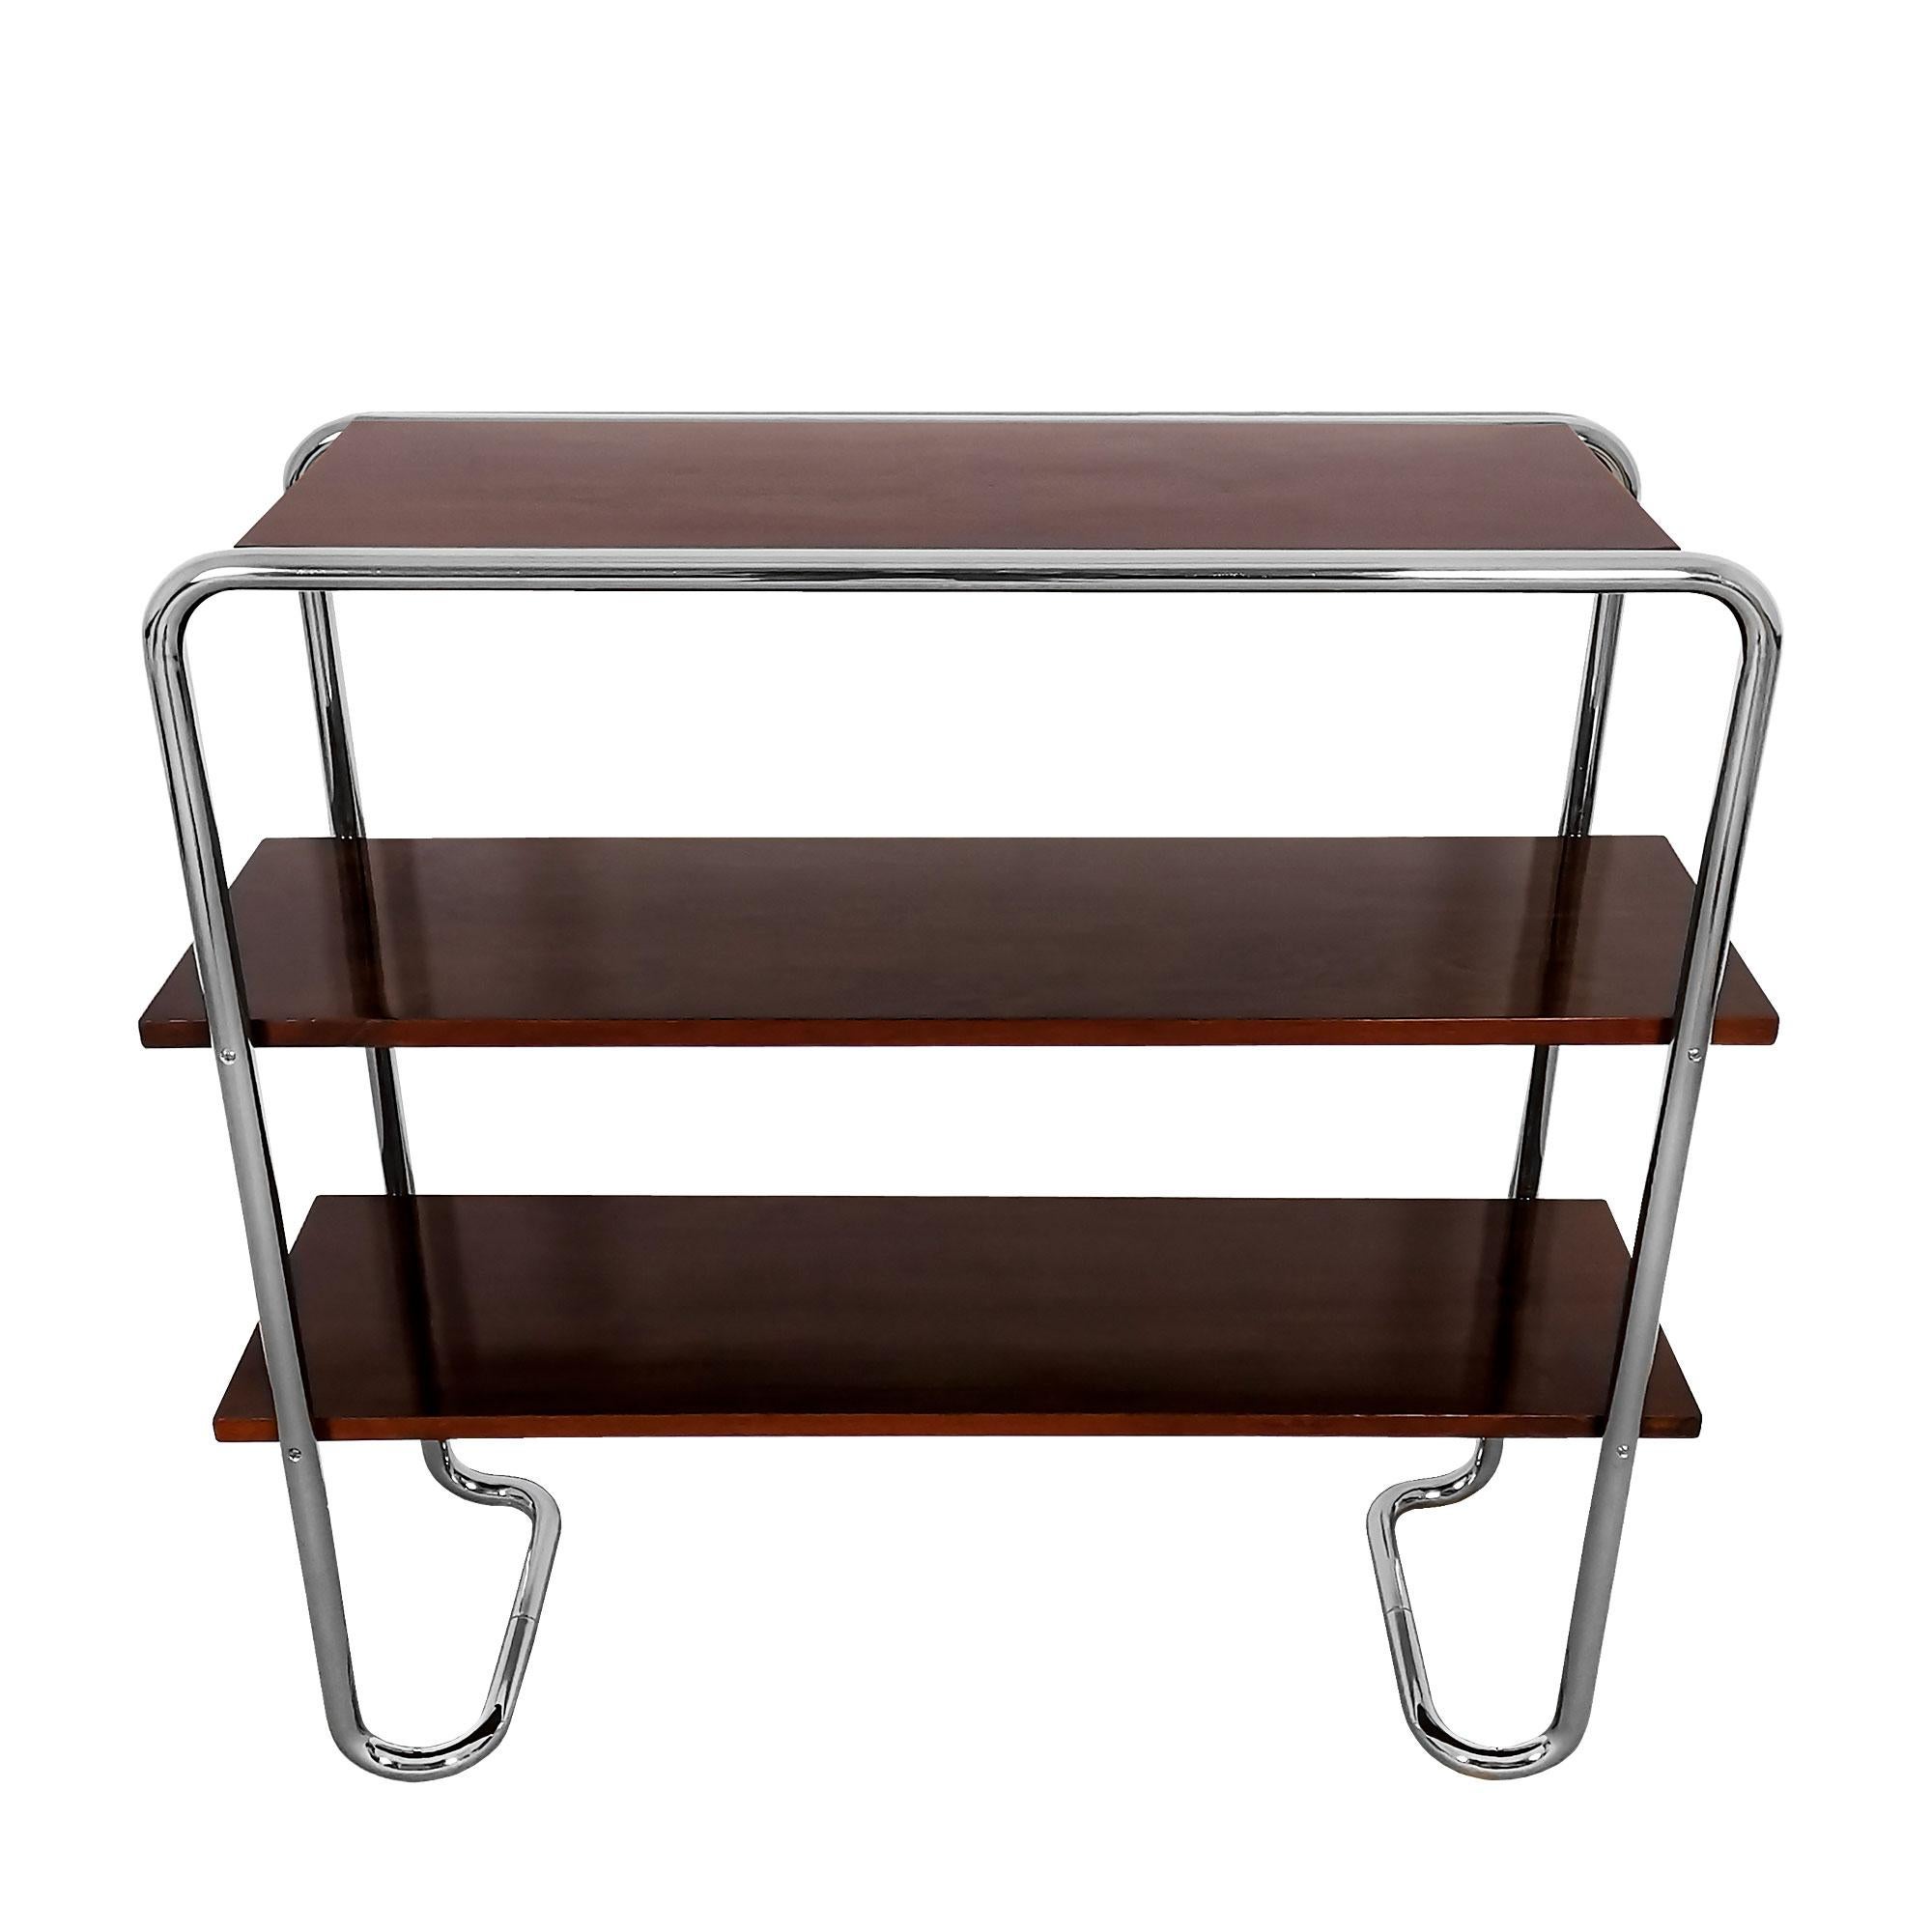 Spanish Console in the Style of Bauhaus Movement, Steel and Walnut - Barcelona, Spain For Sale